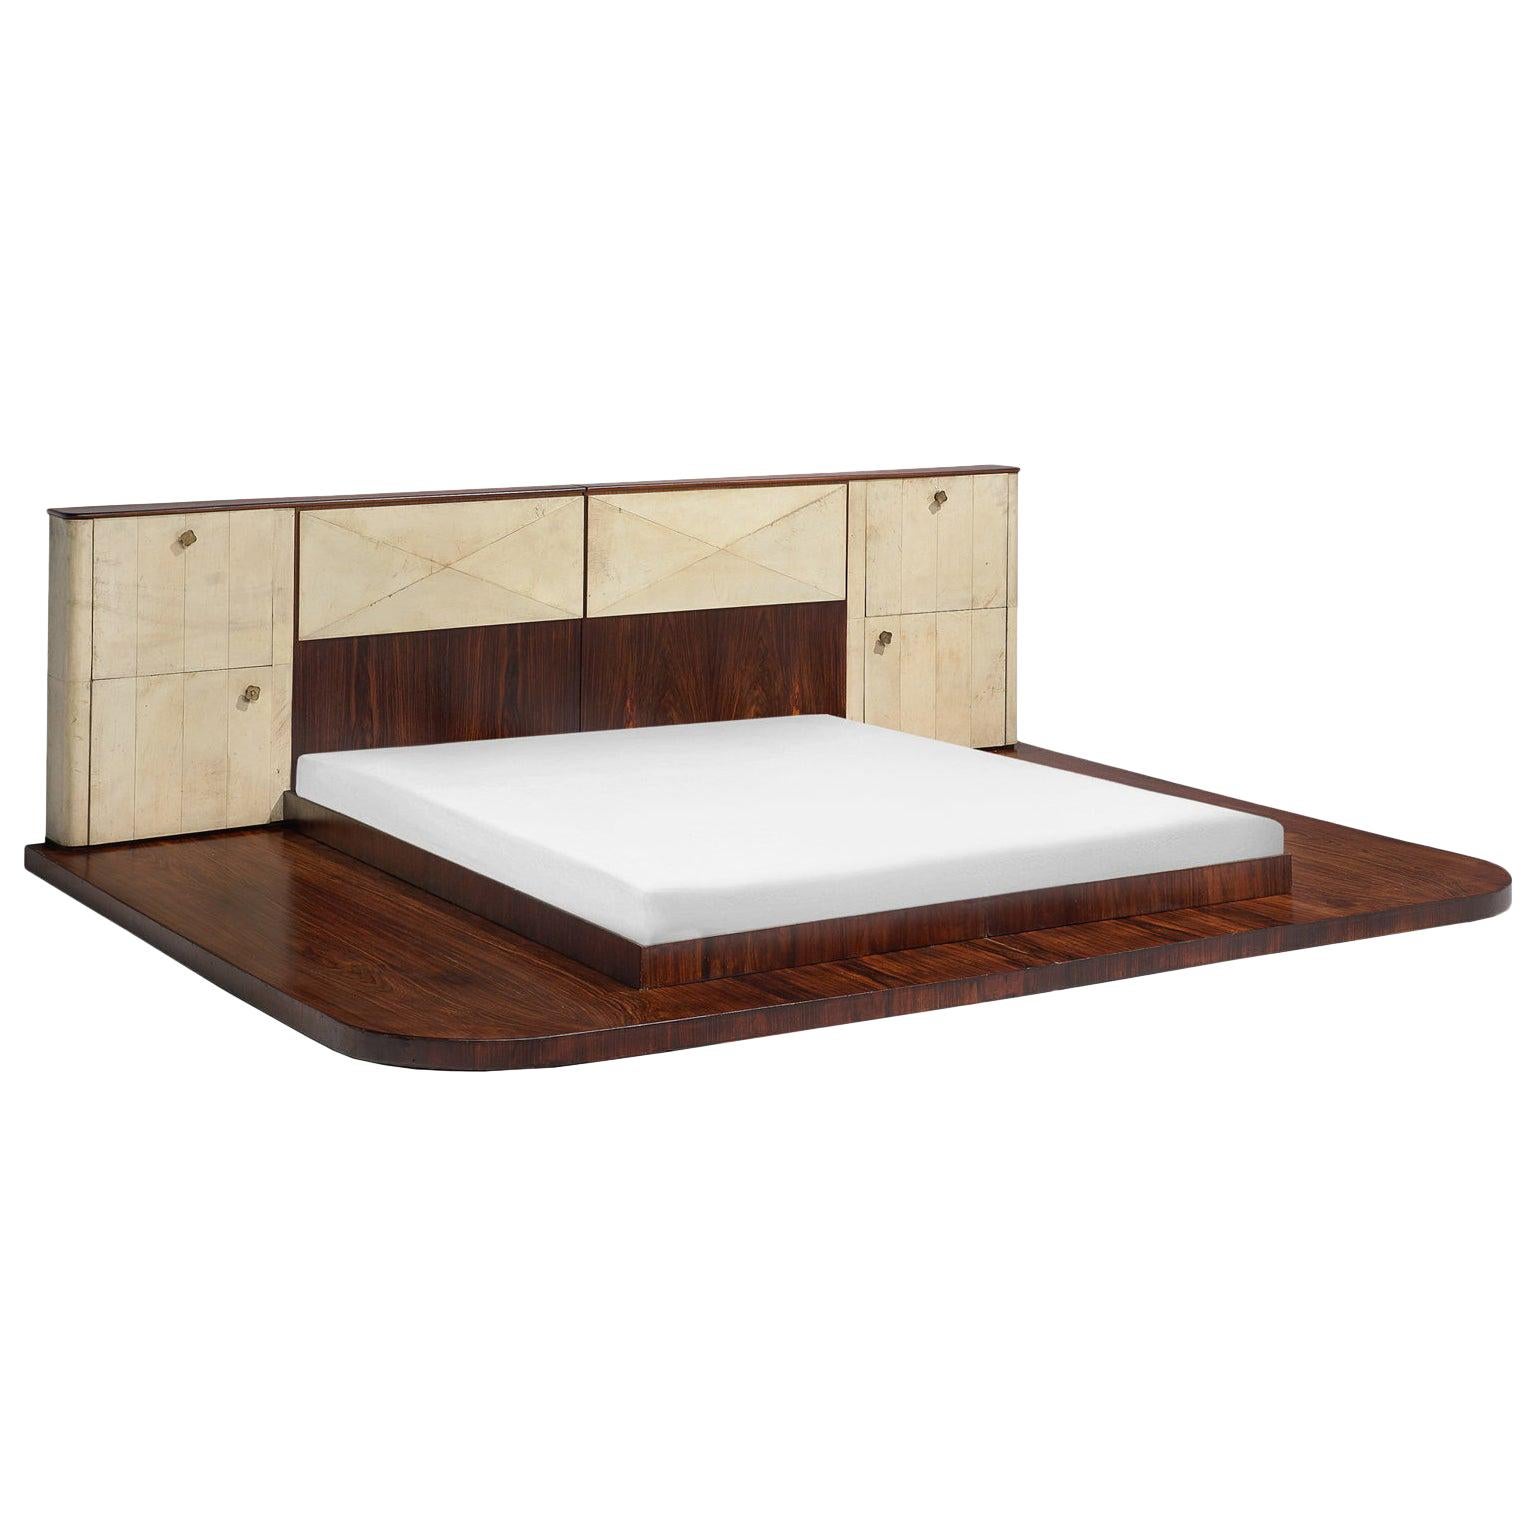 Italian Rosewood and Parchment Kingsize Bed in Style of Valzania